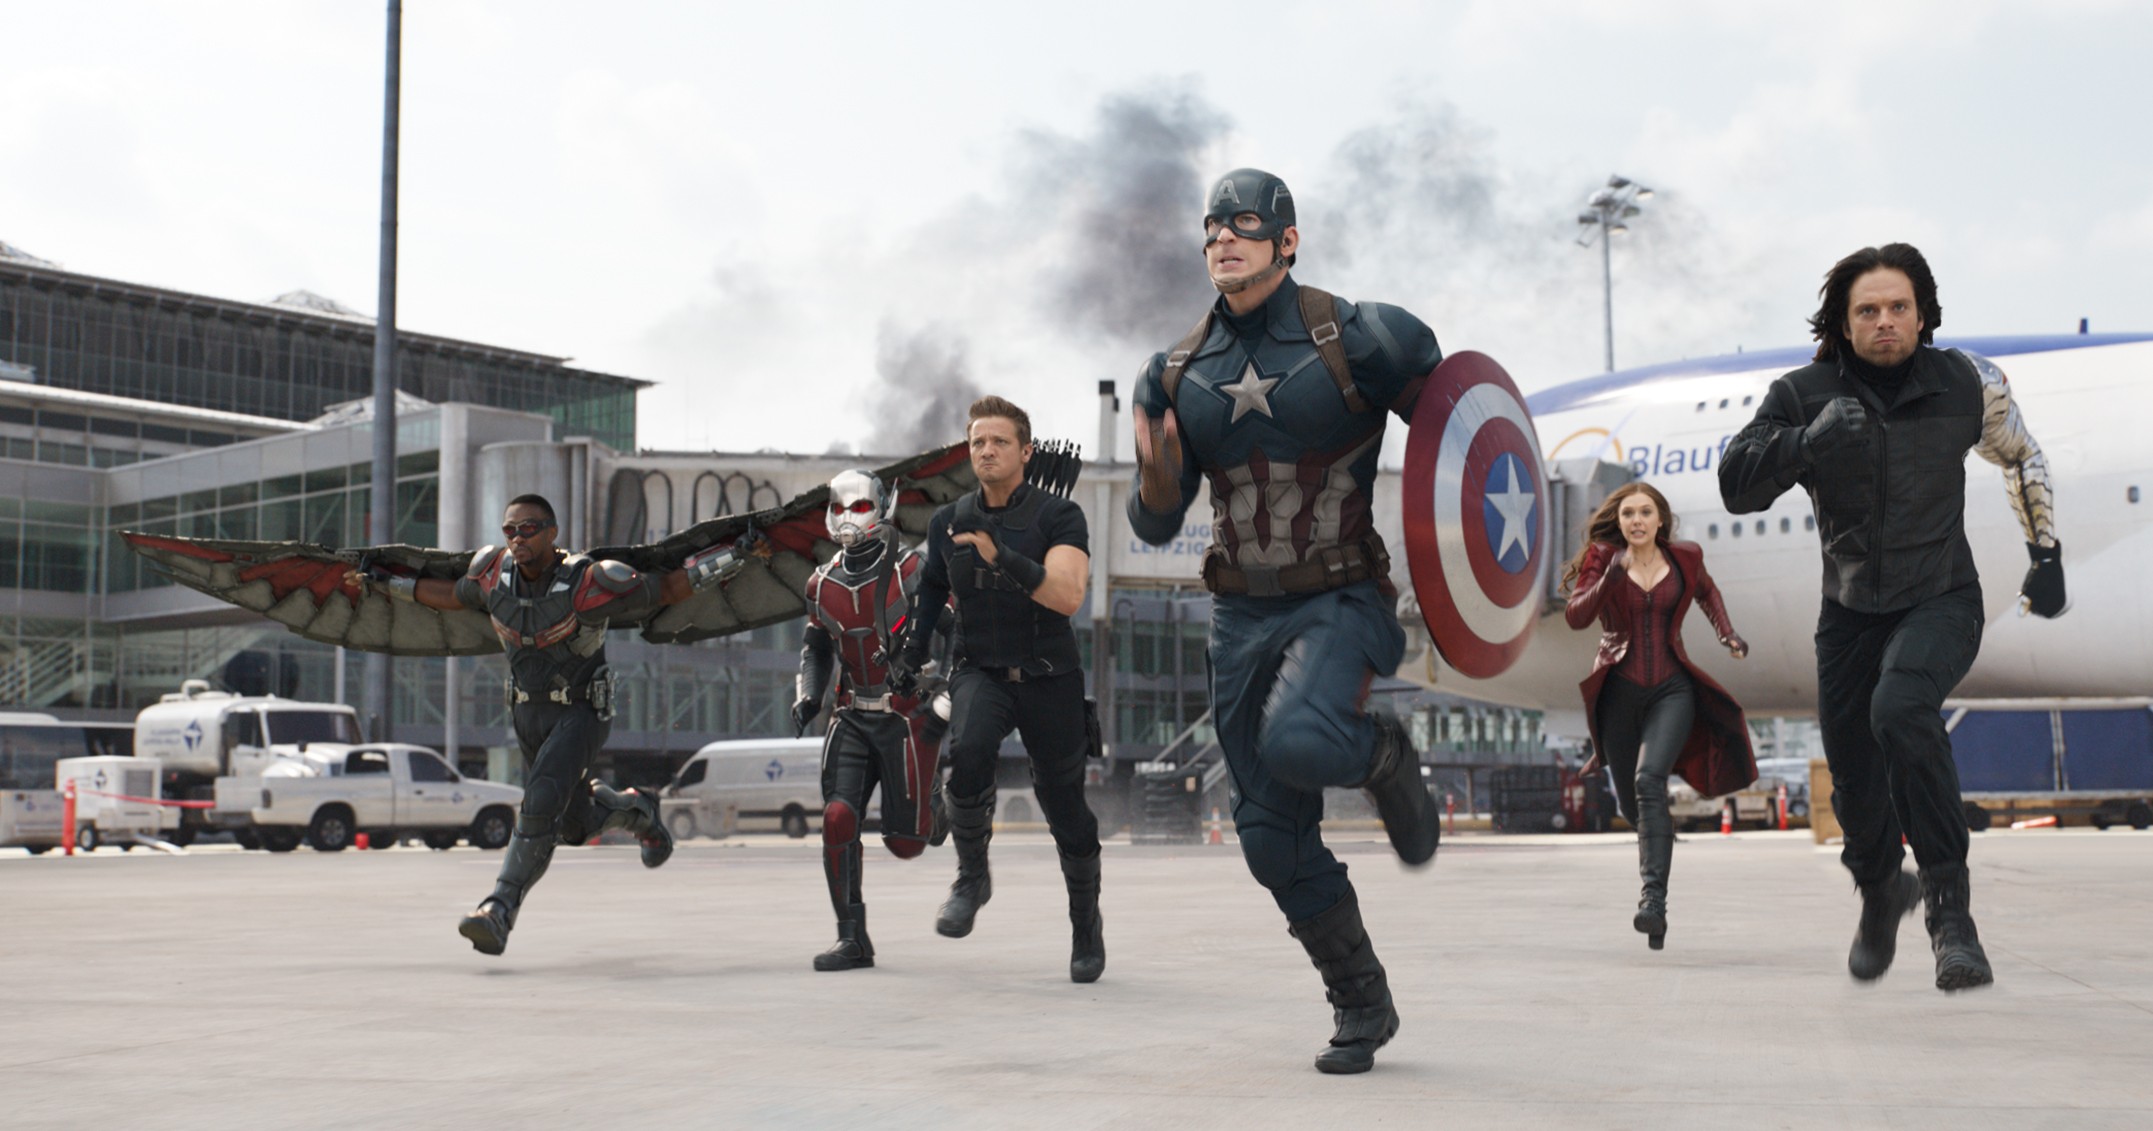 Marvel's Captain AmericaPhoto – played by American actor Chris Evans – uses his shield as his main weapon, which he throws around in a devastating manner. Photo: Film Frame